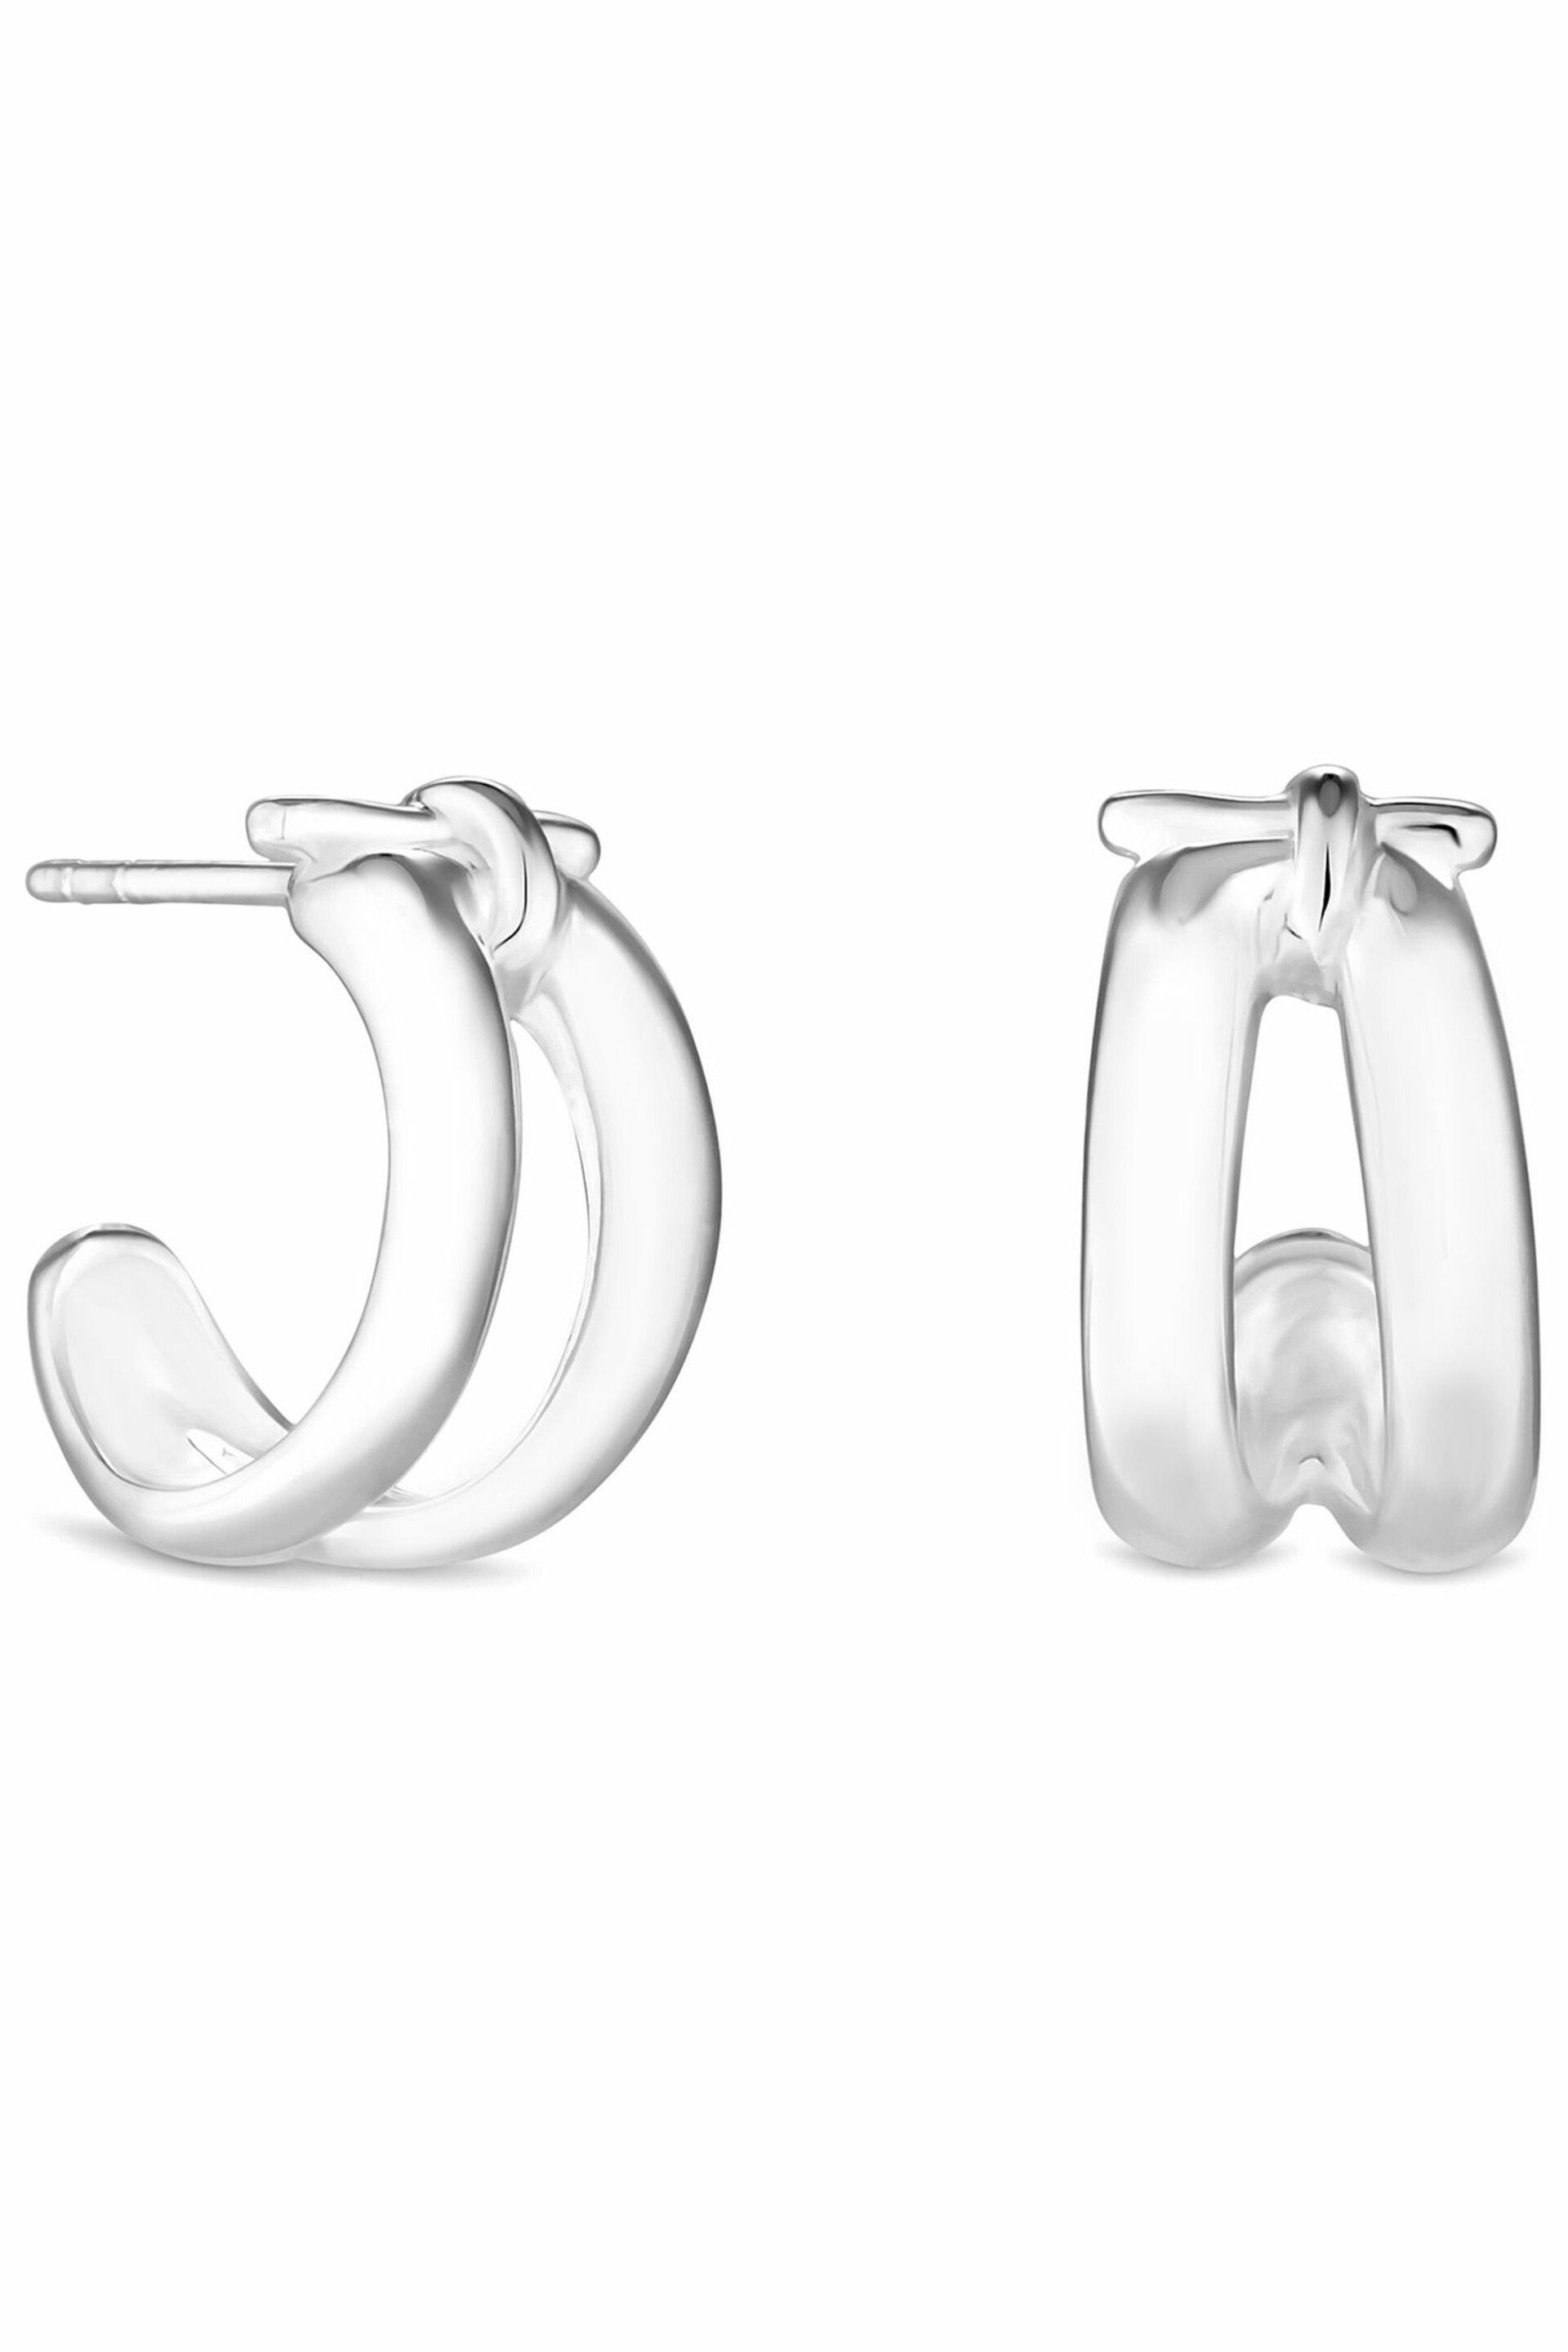 Simply Silver Sterling Silver Tone 925 Double Row Small Hoop Earrings - Image 3 of 3